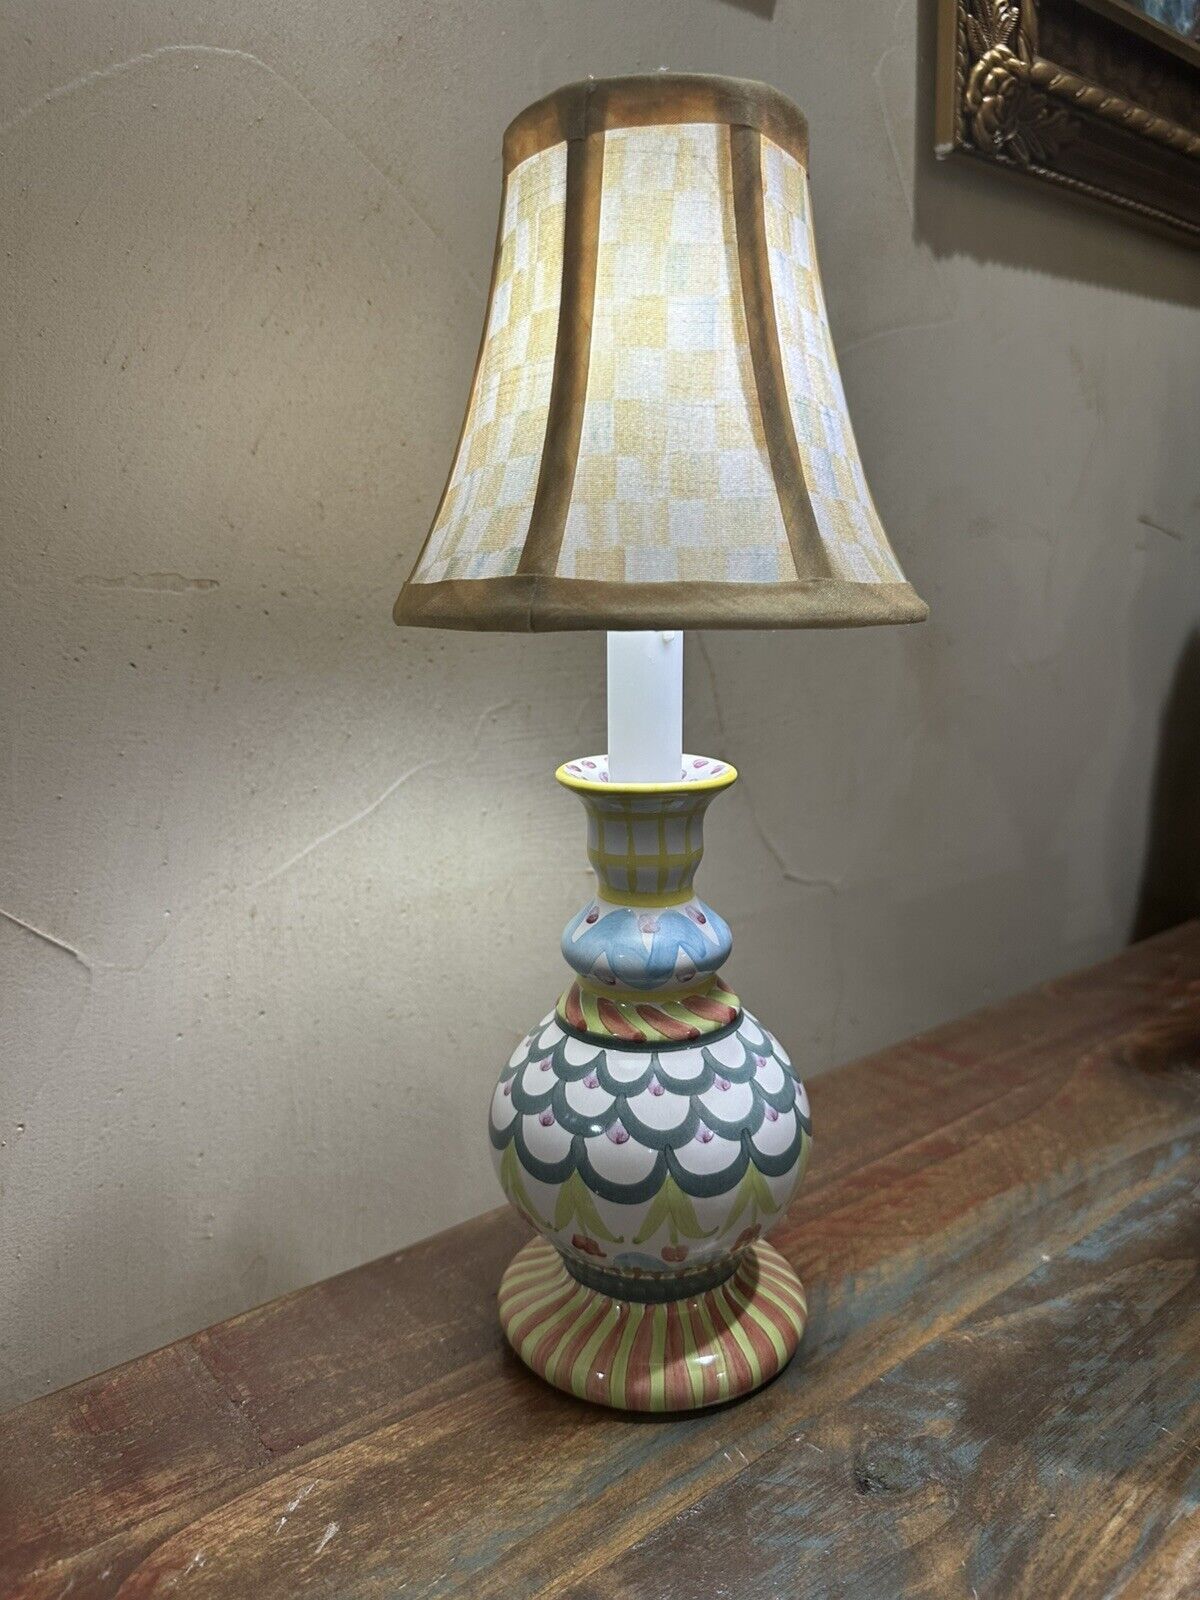 Mackenzie-Childs King Ferry & Parchment Check Lamp